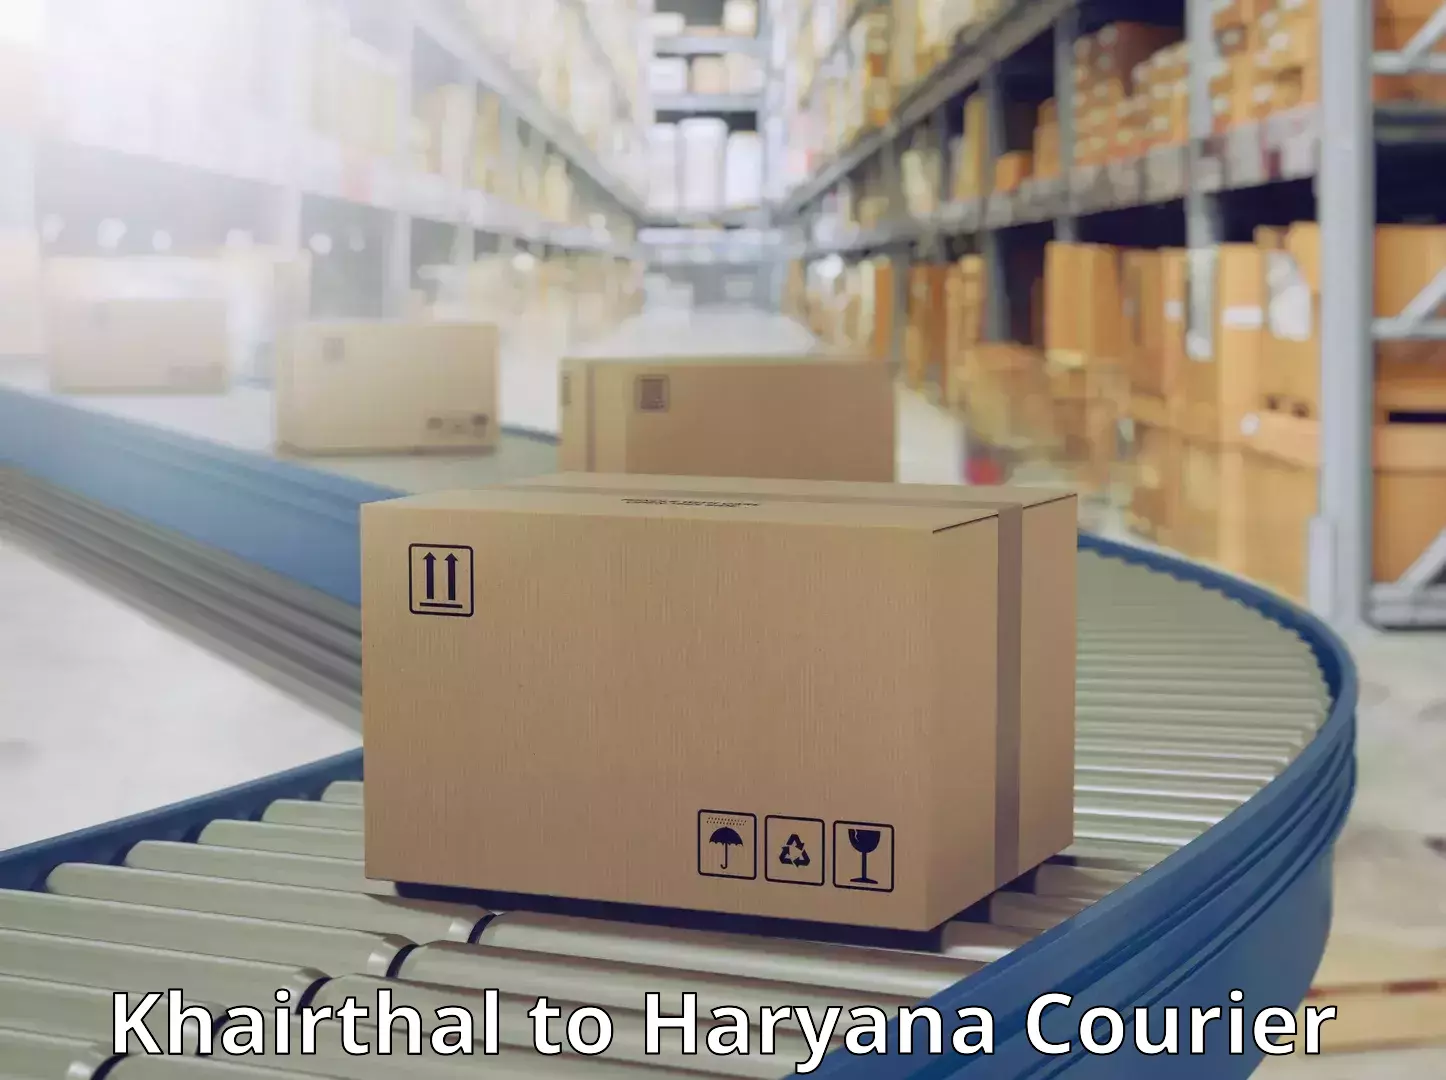 Smart courier technologies Khairthal to Chaudhary Charan Singh Haryana Agricultural University Hisar